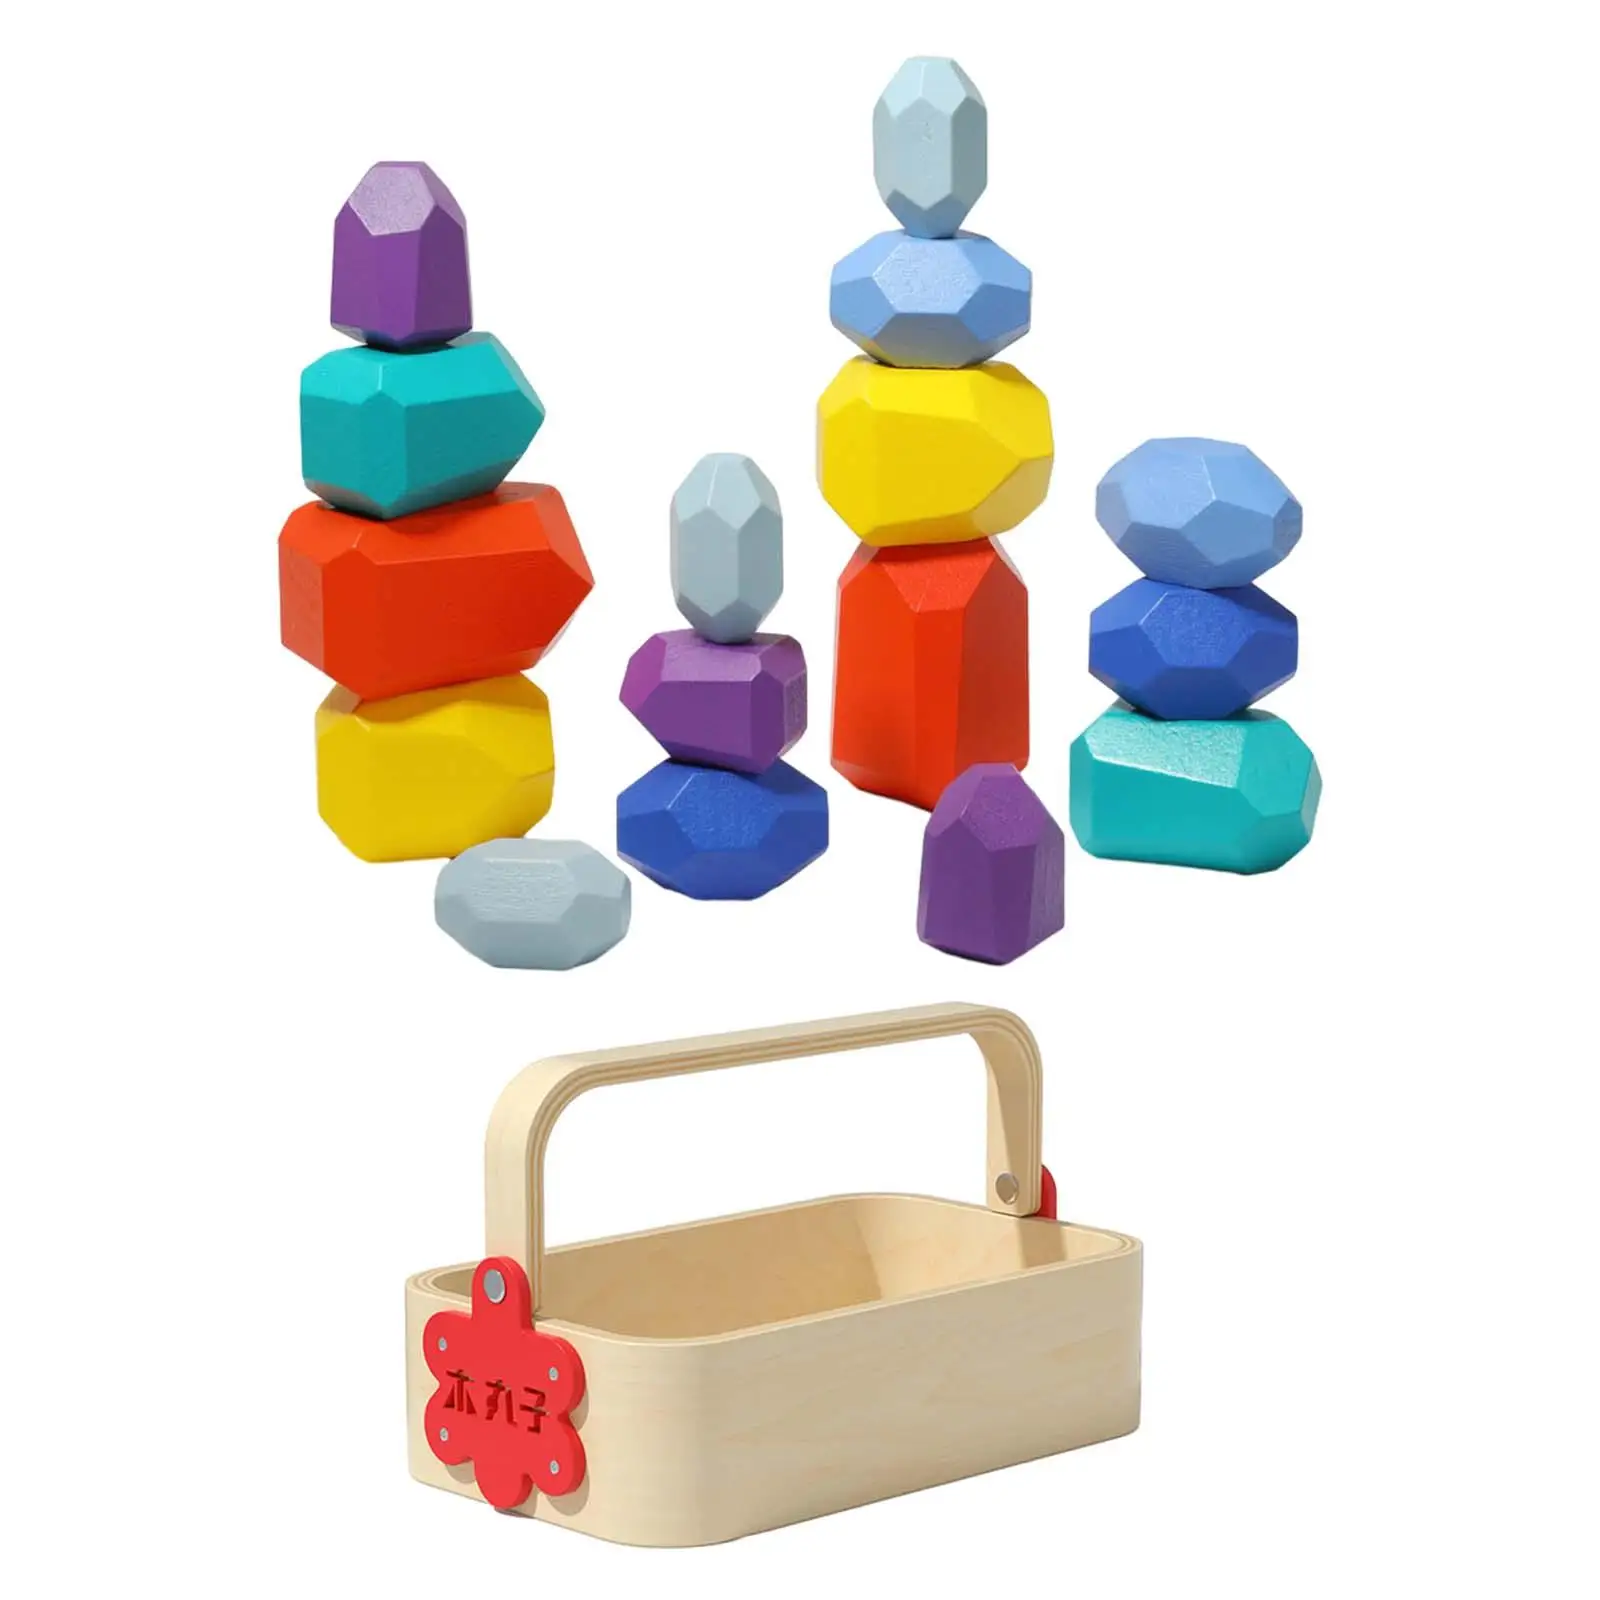 Stacking Stones Colorful Stacked Stone Puzzle Toys with Basket Promotes Creativity Colorful Building Blocks Holiday Gifts